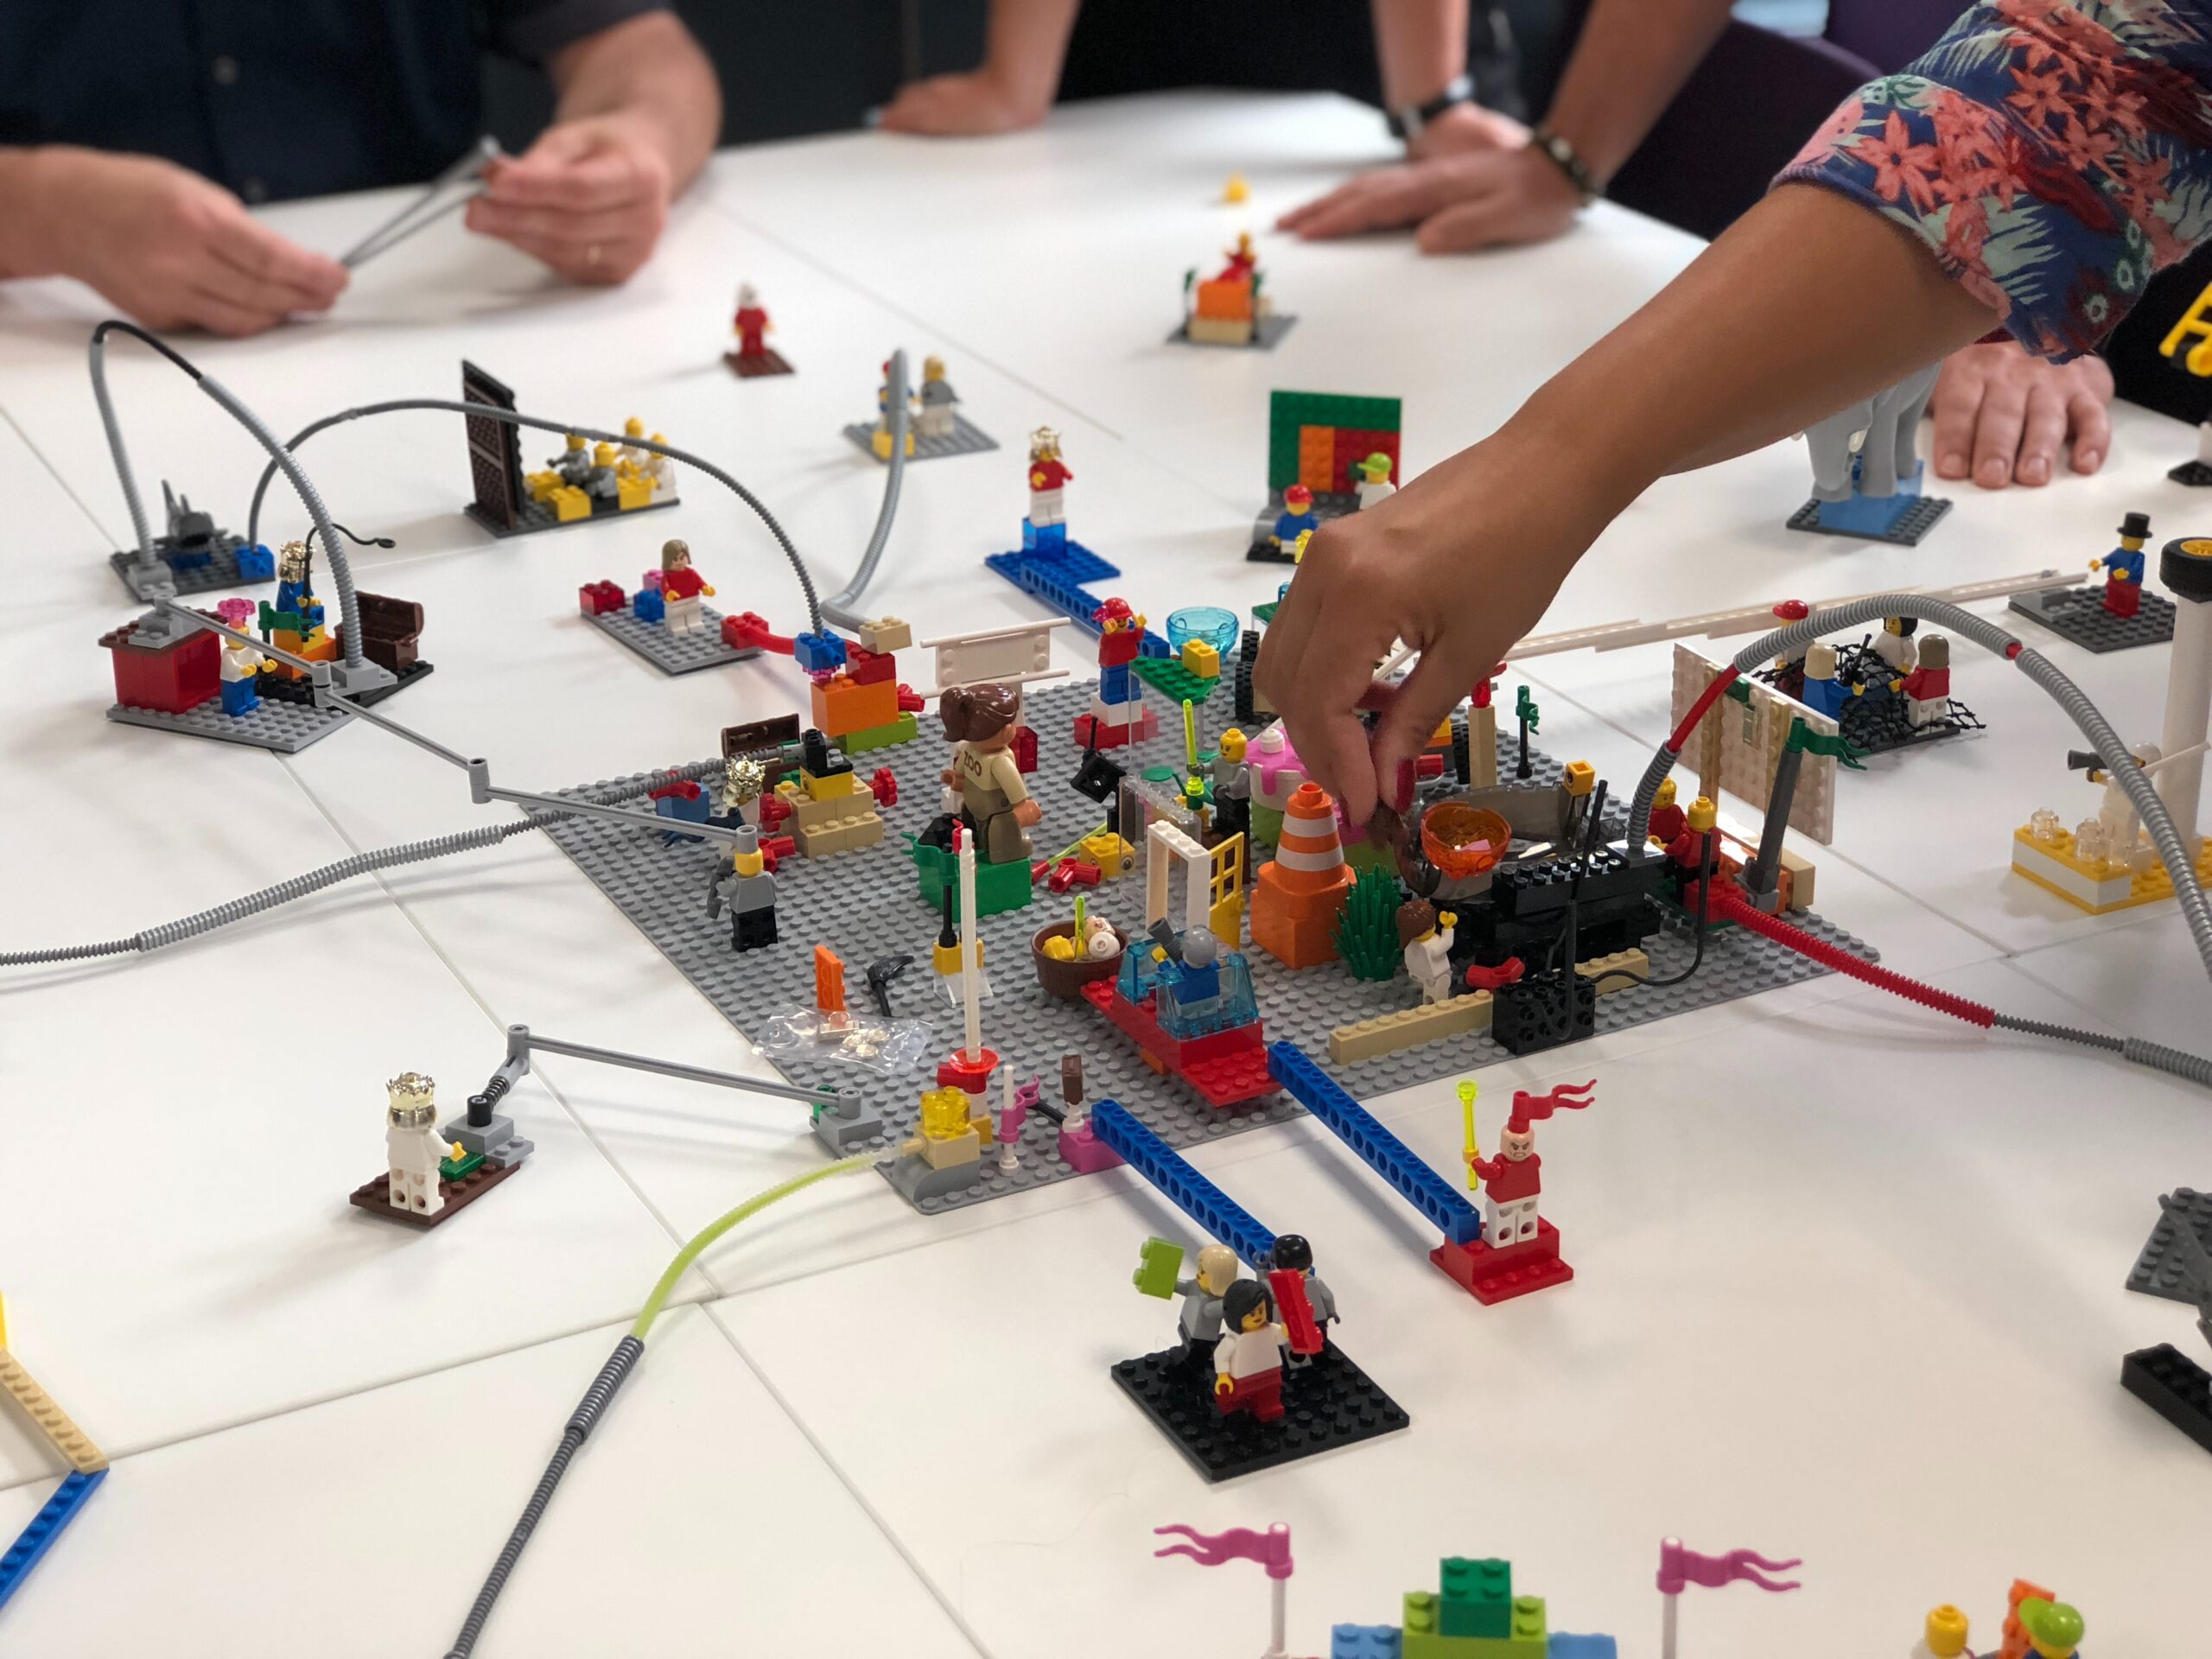 Image: Photograph of hands building something with LEGO®.